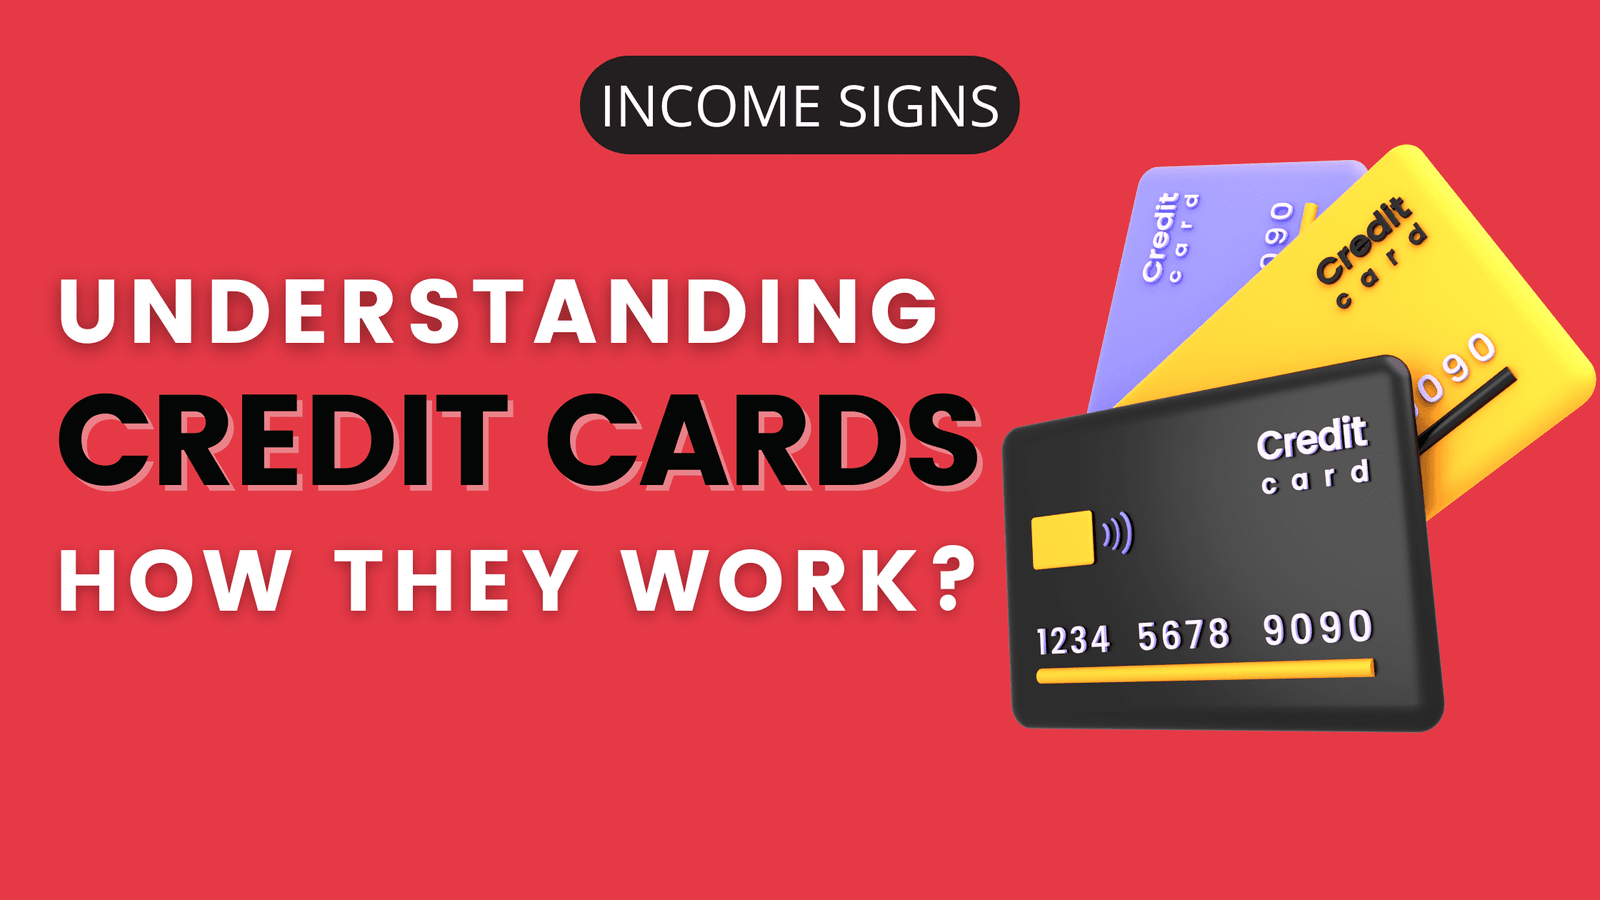 Understanding Credit Cards: What Are They and How Do They Work?